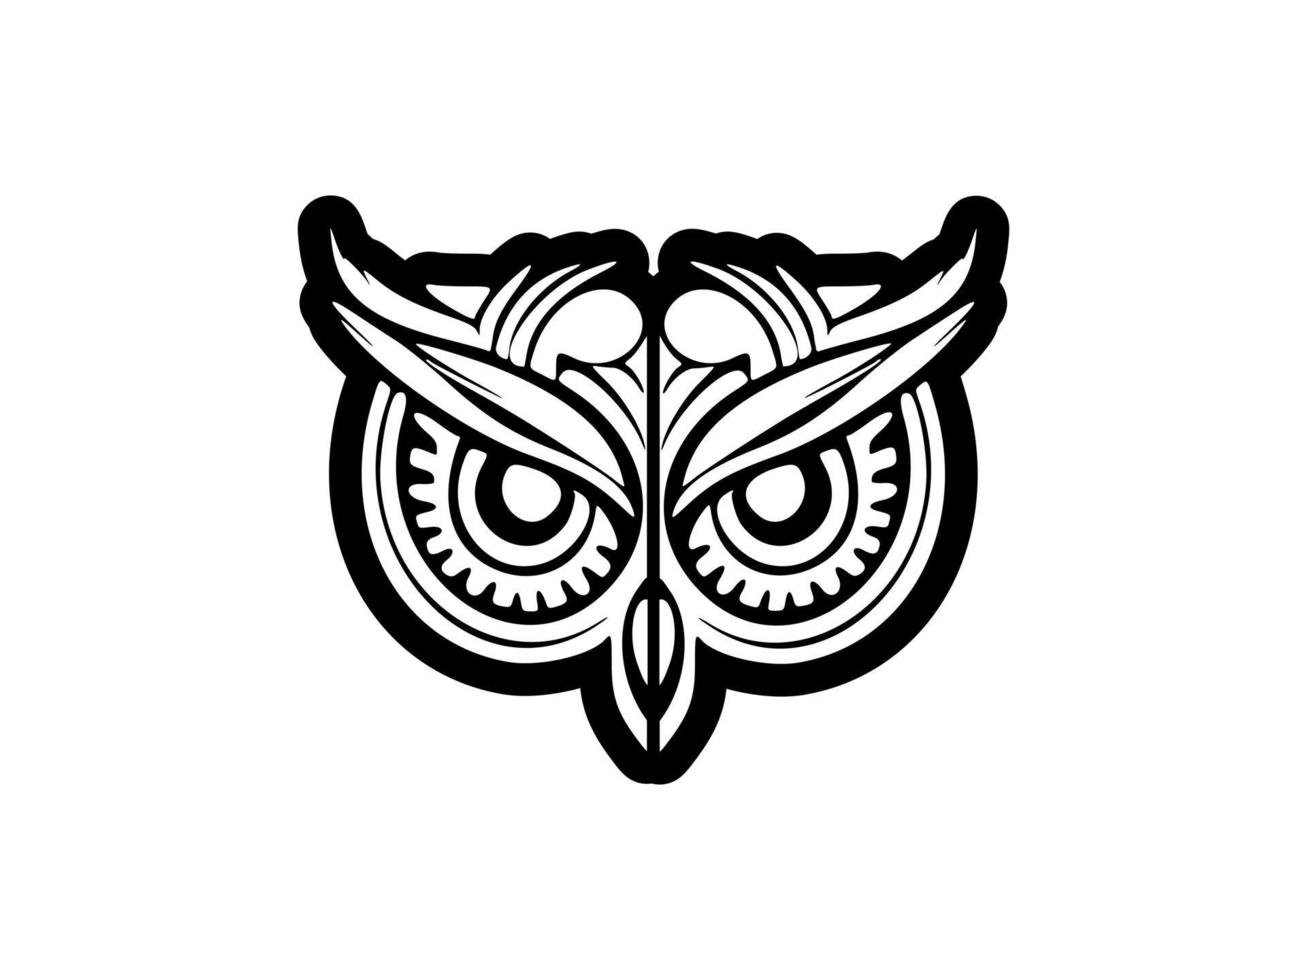 A vector logo of an owl, in black and white, with a minimalistic design.